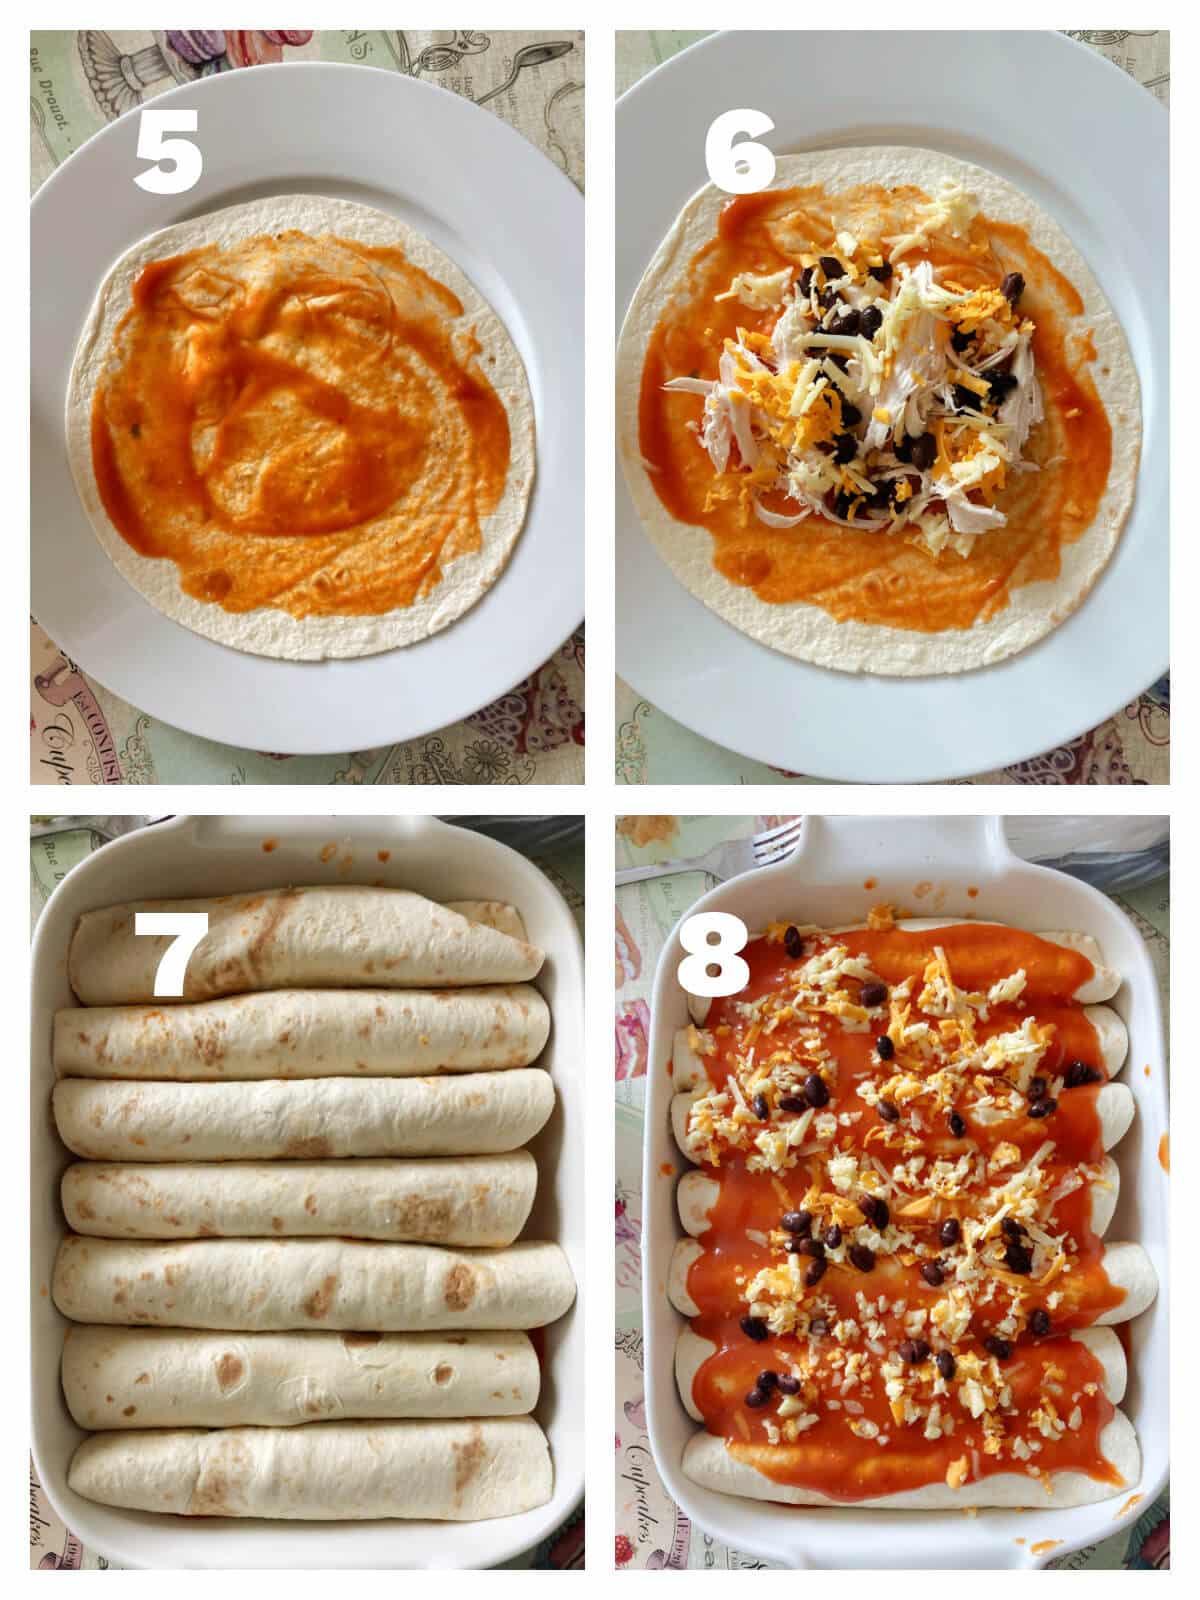 Collage of 4 photos to show how to assemble enchiladas